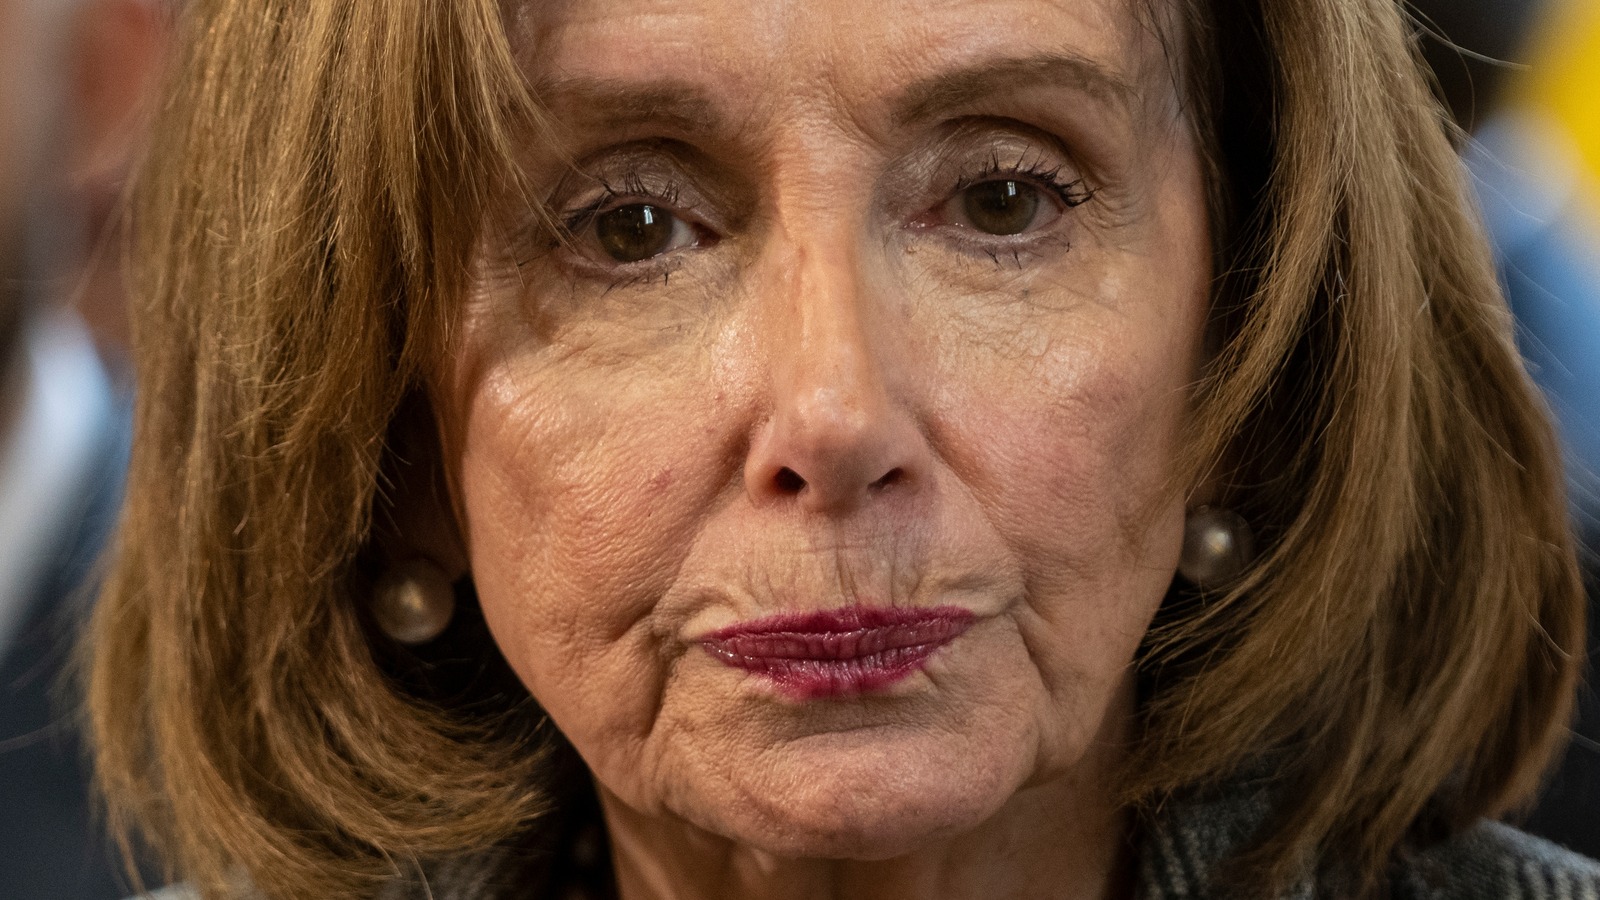 Obstacles Nancy Pelosi Had To To Get Where She Is